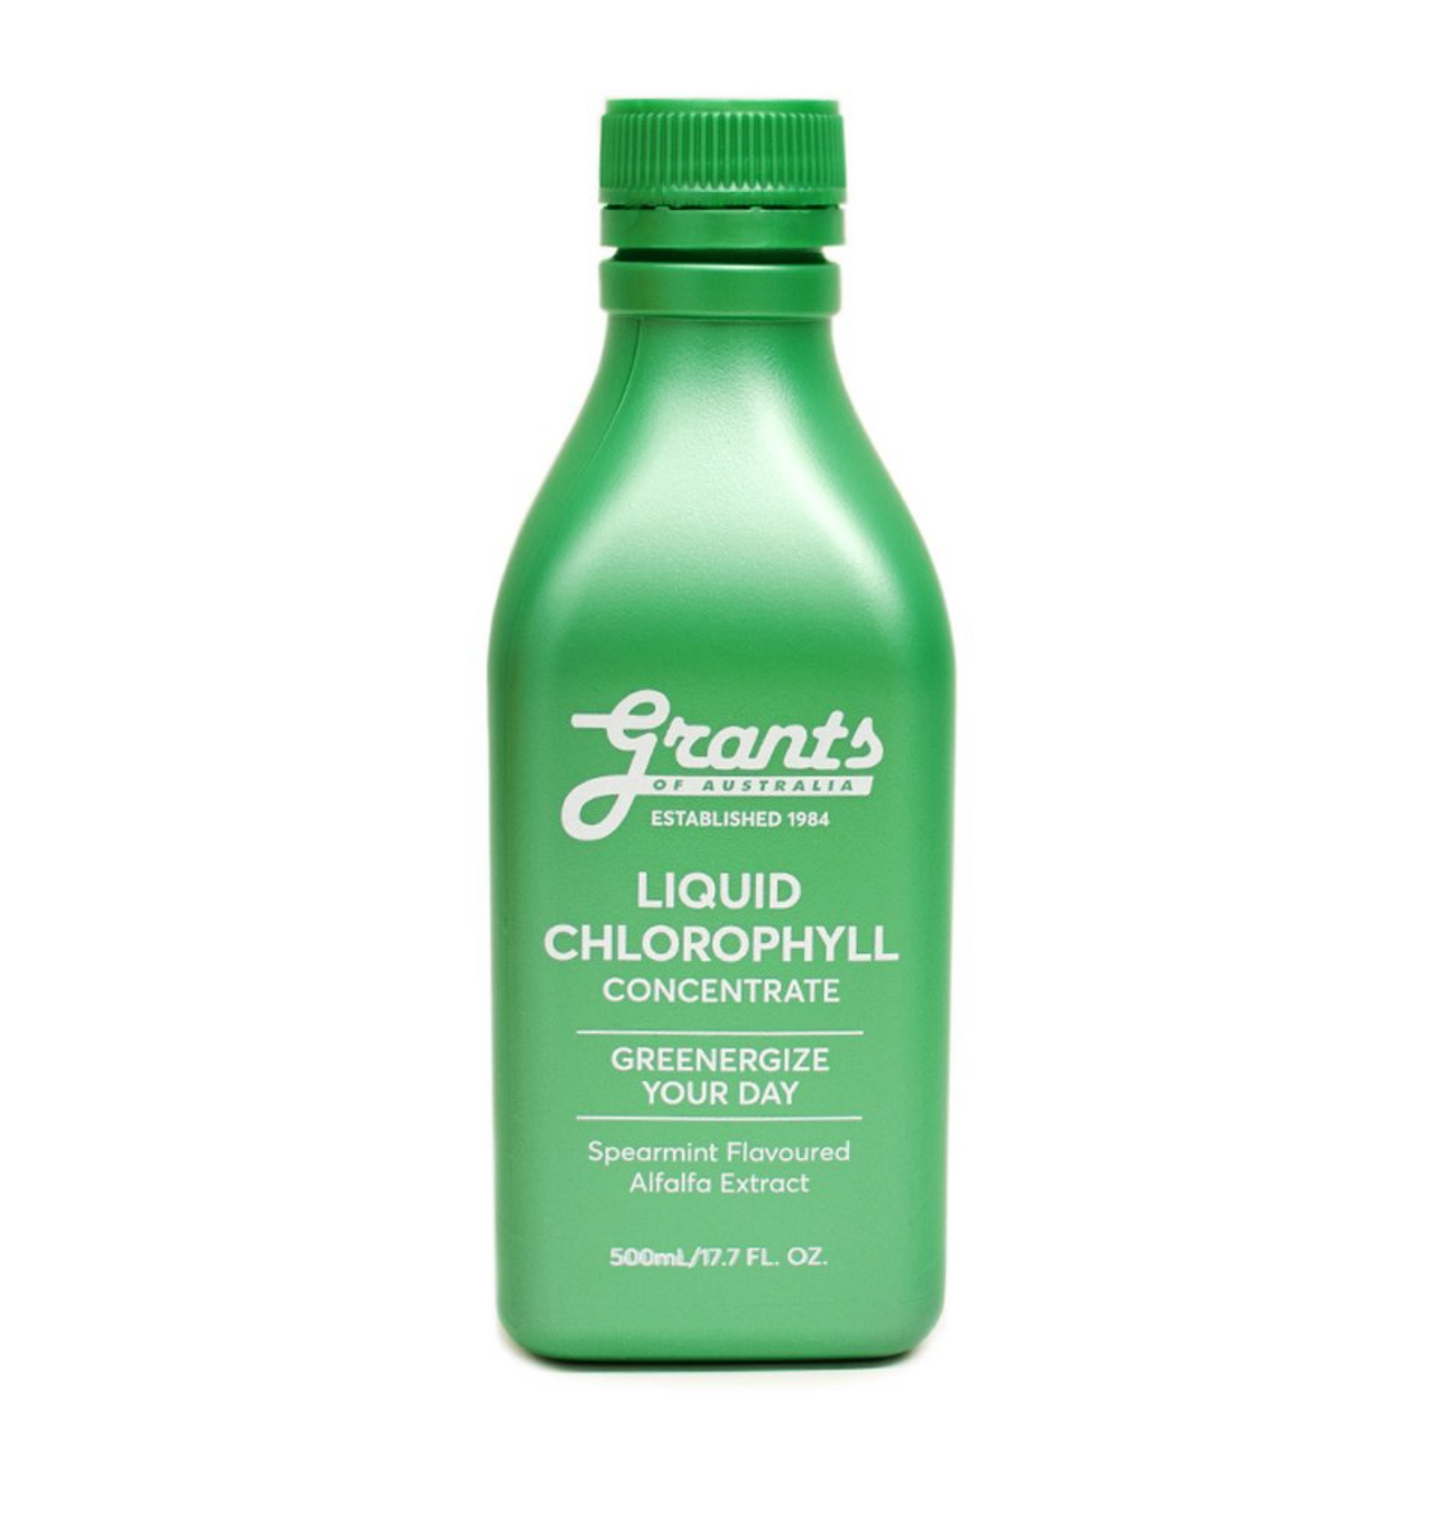 Grants Liquid Chlorophyll Concentrate 500ml, Spearmint Flavour